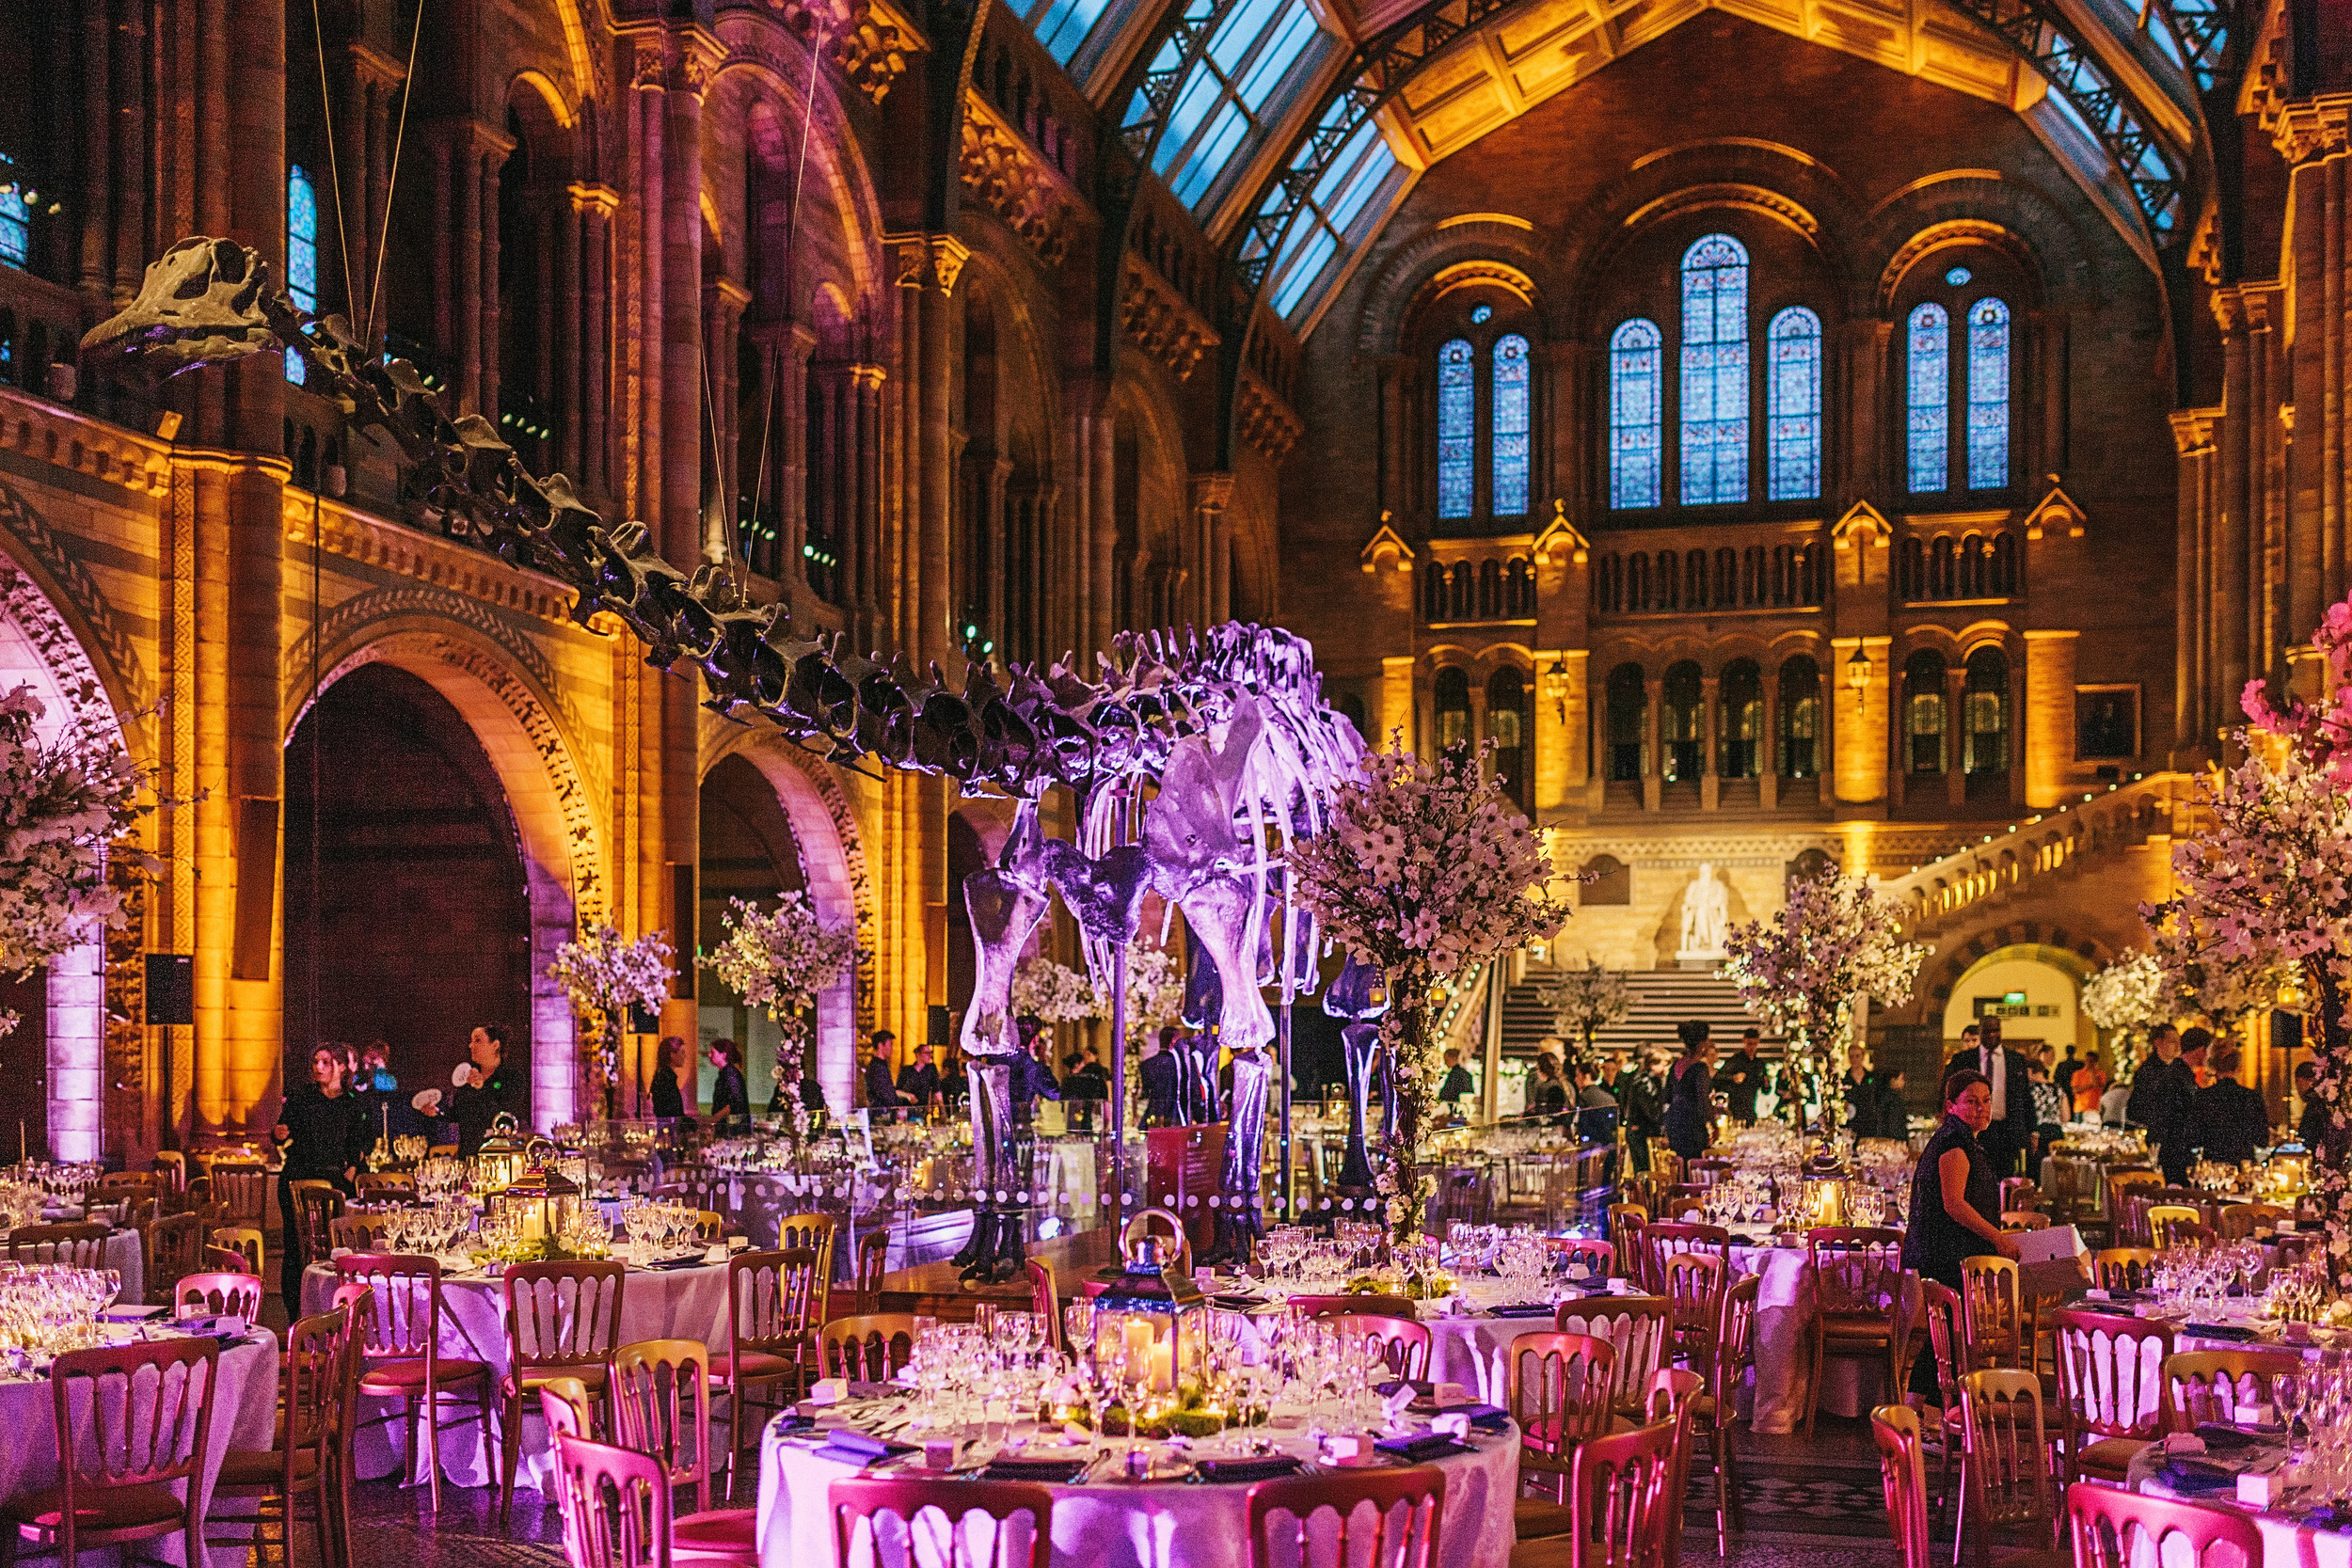 Wedding Videography Still - The Great Hall in The Natural History Museum